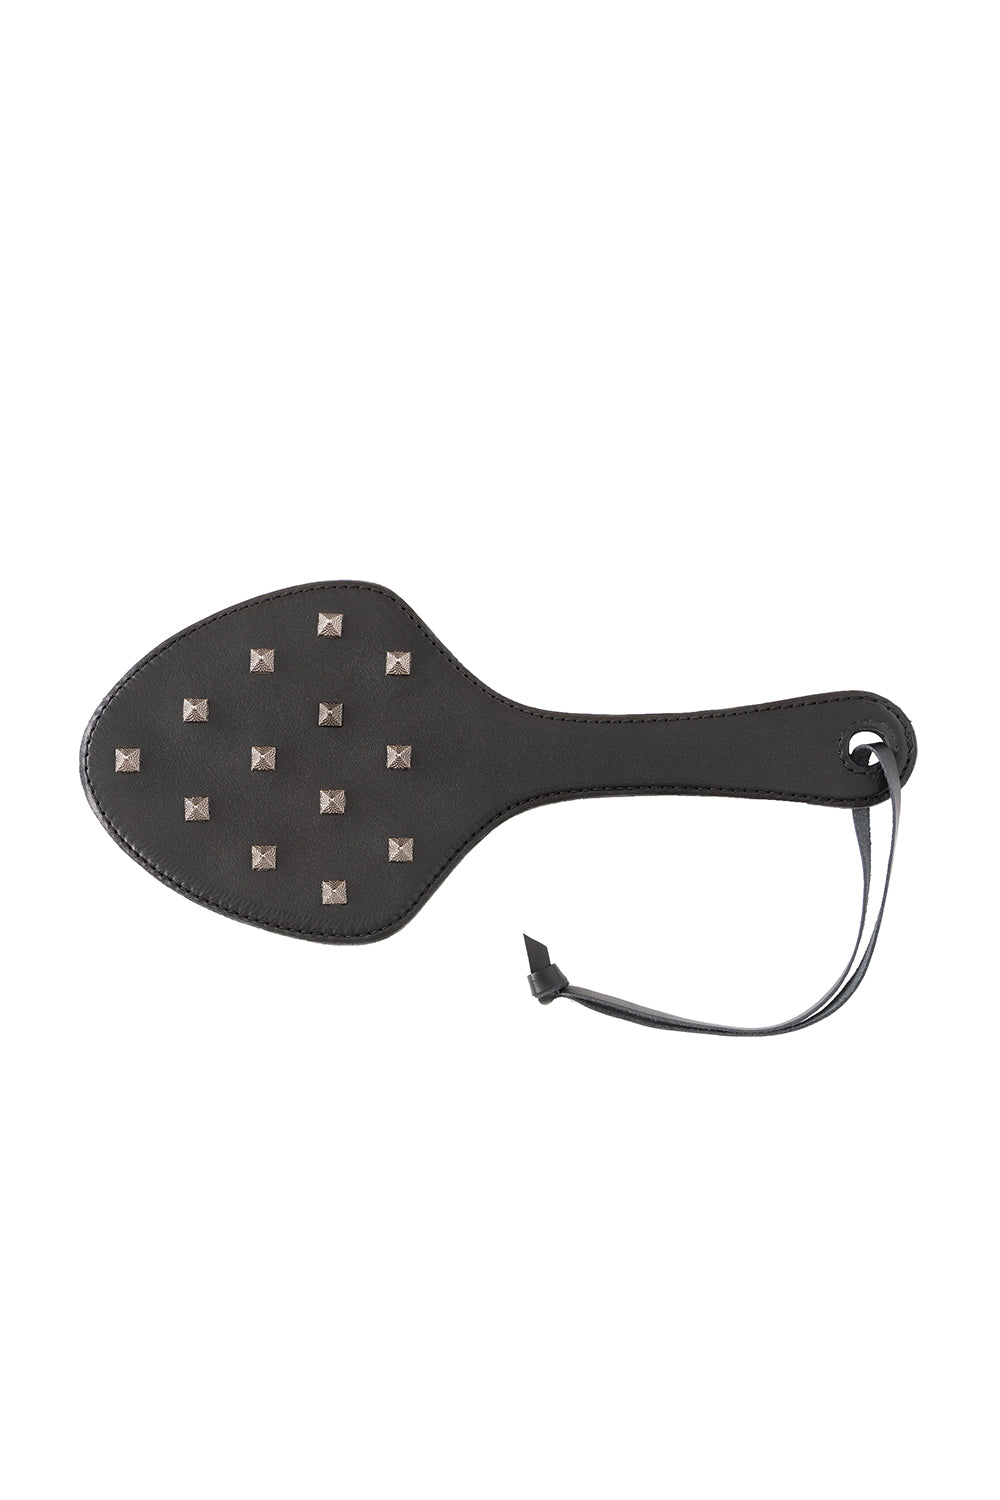 Genuine Leather Spanking Paddle with Spikes